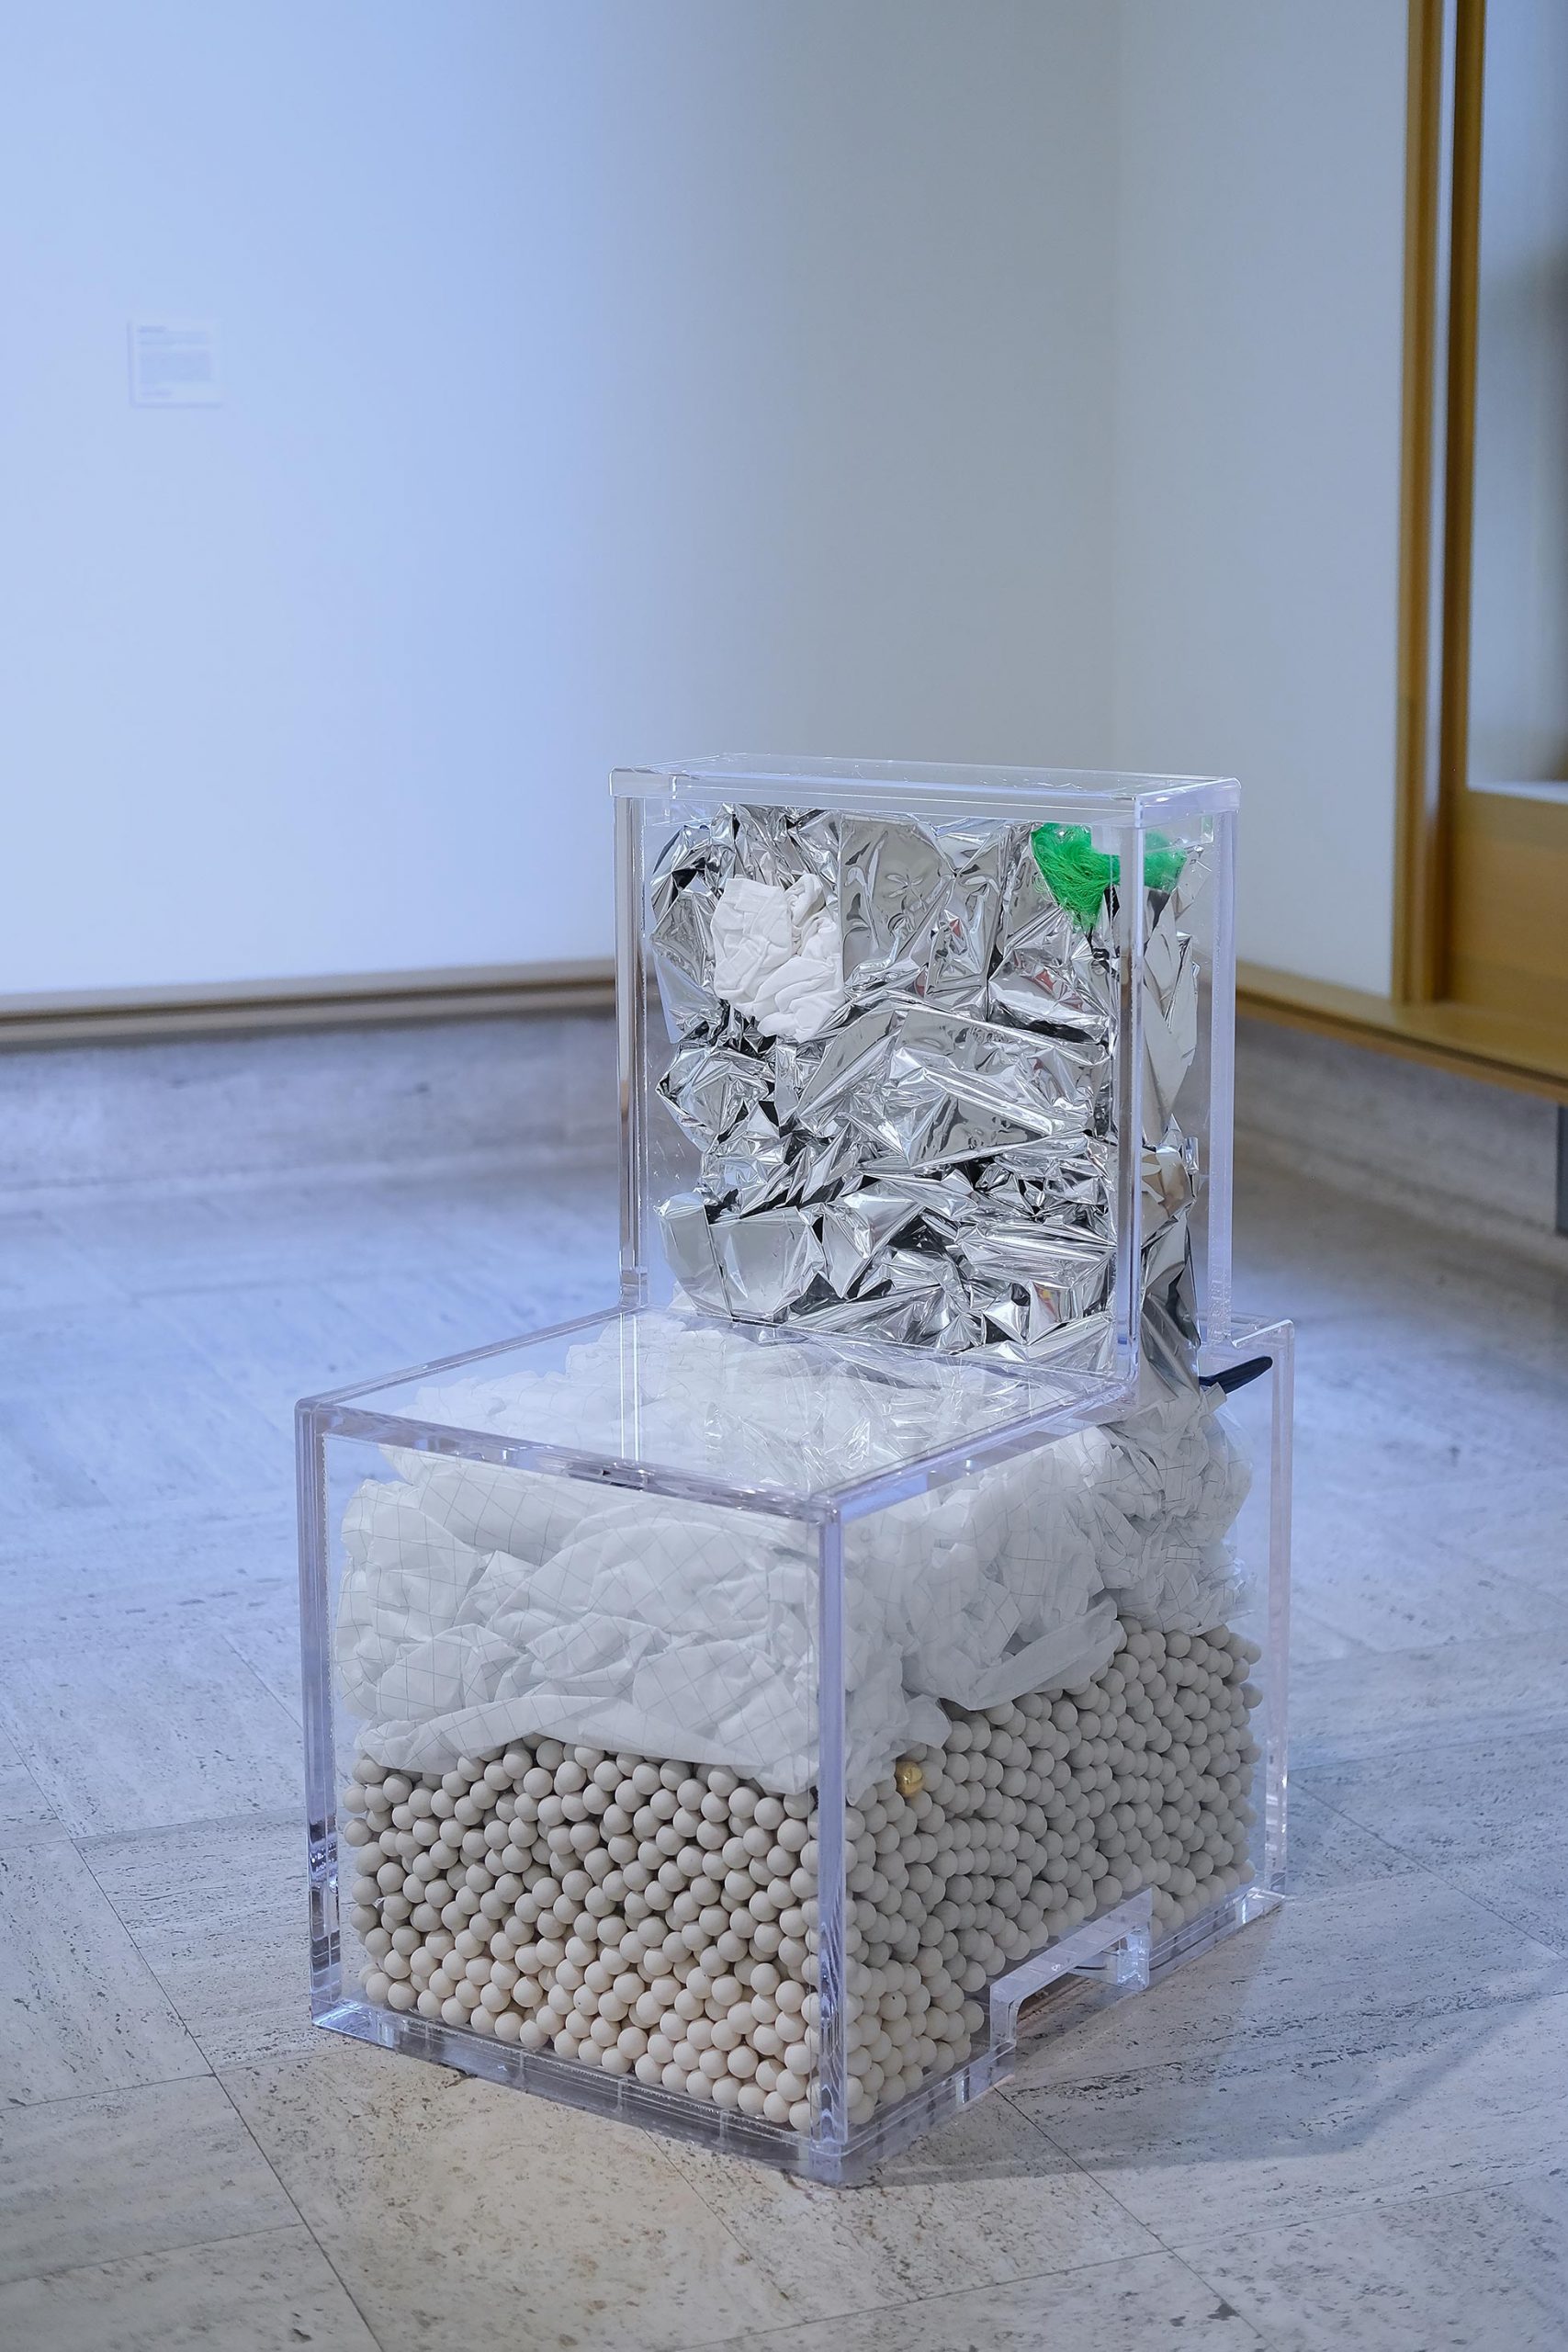 Cube chair made out of clear material filled with white fiber, ceramic balls, and silver foil.